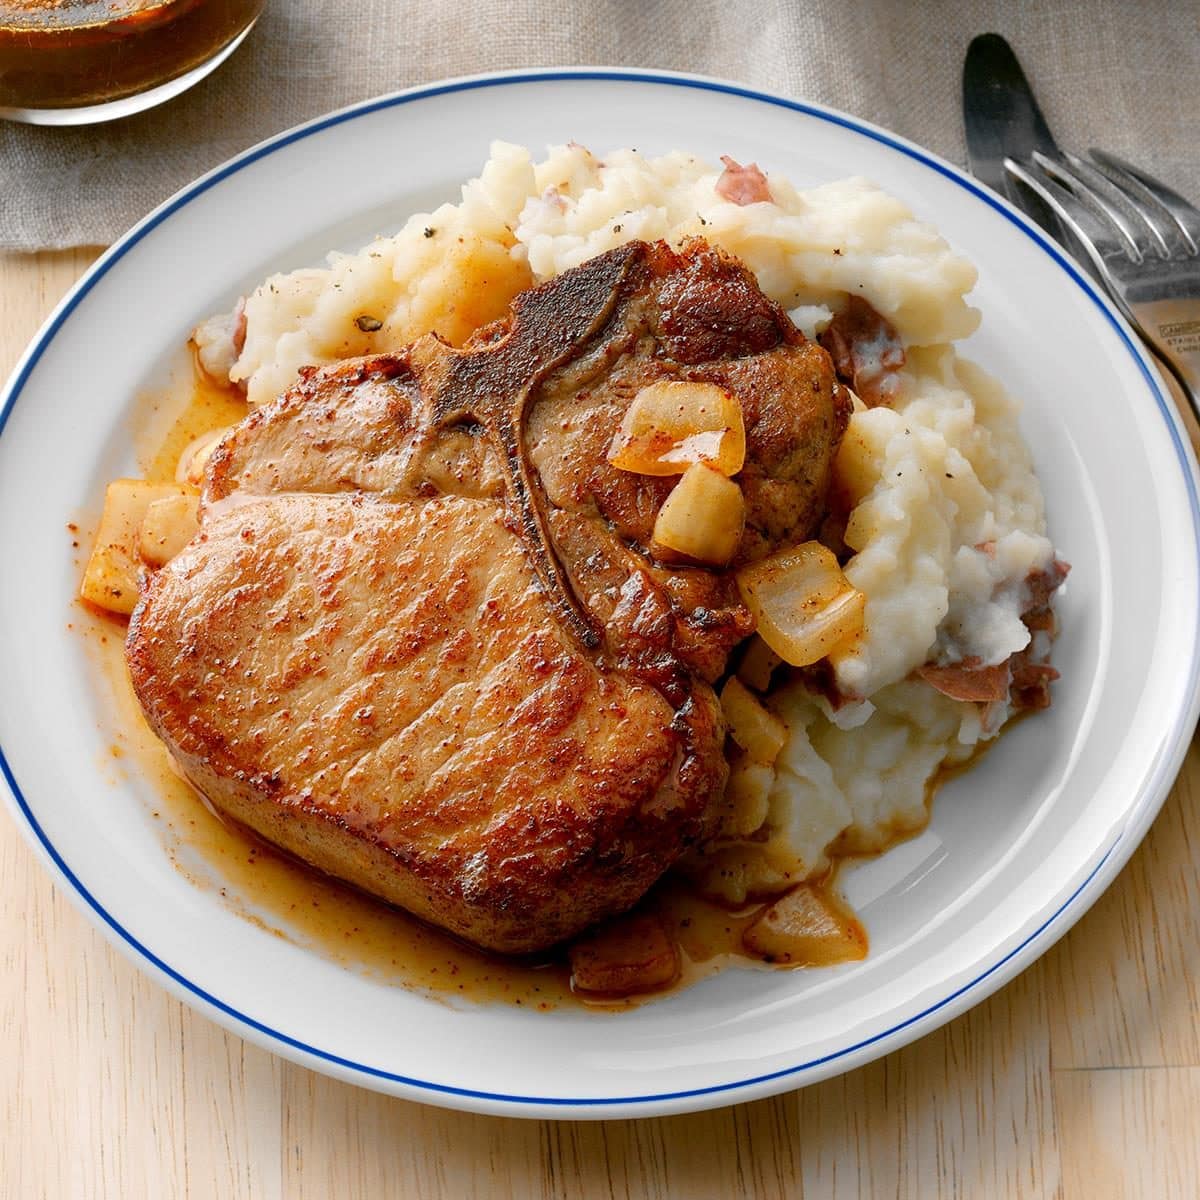 Baked Saucy Pork Chops Recipe: How to Make It